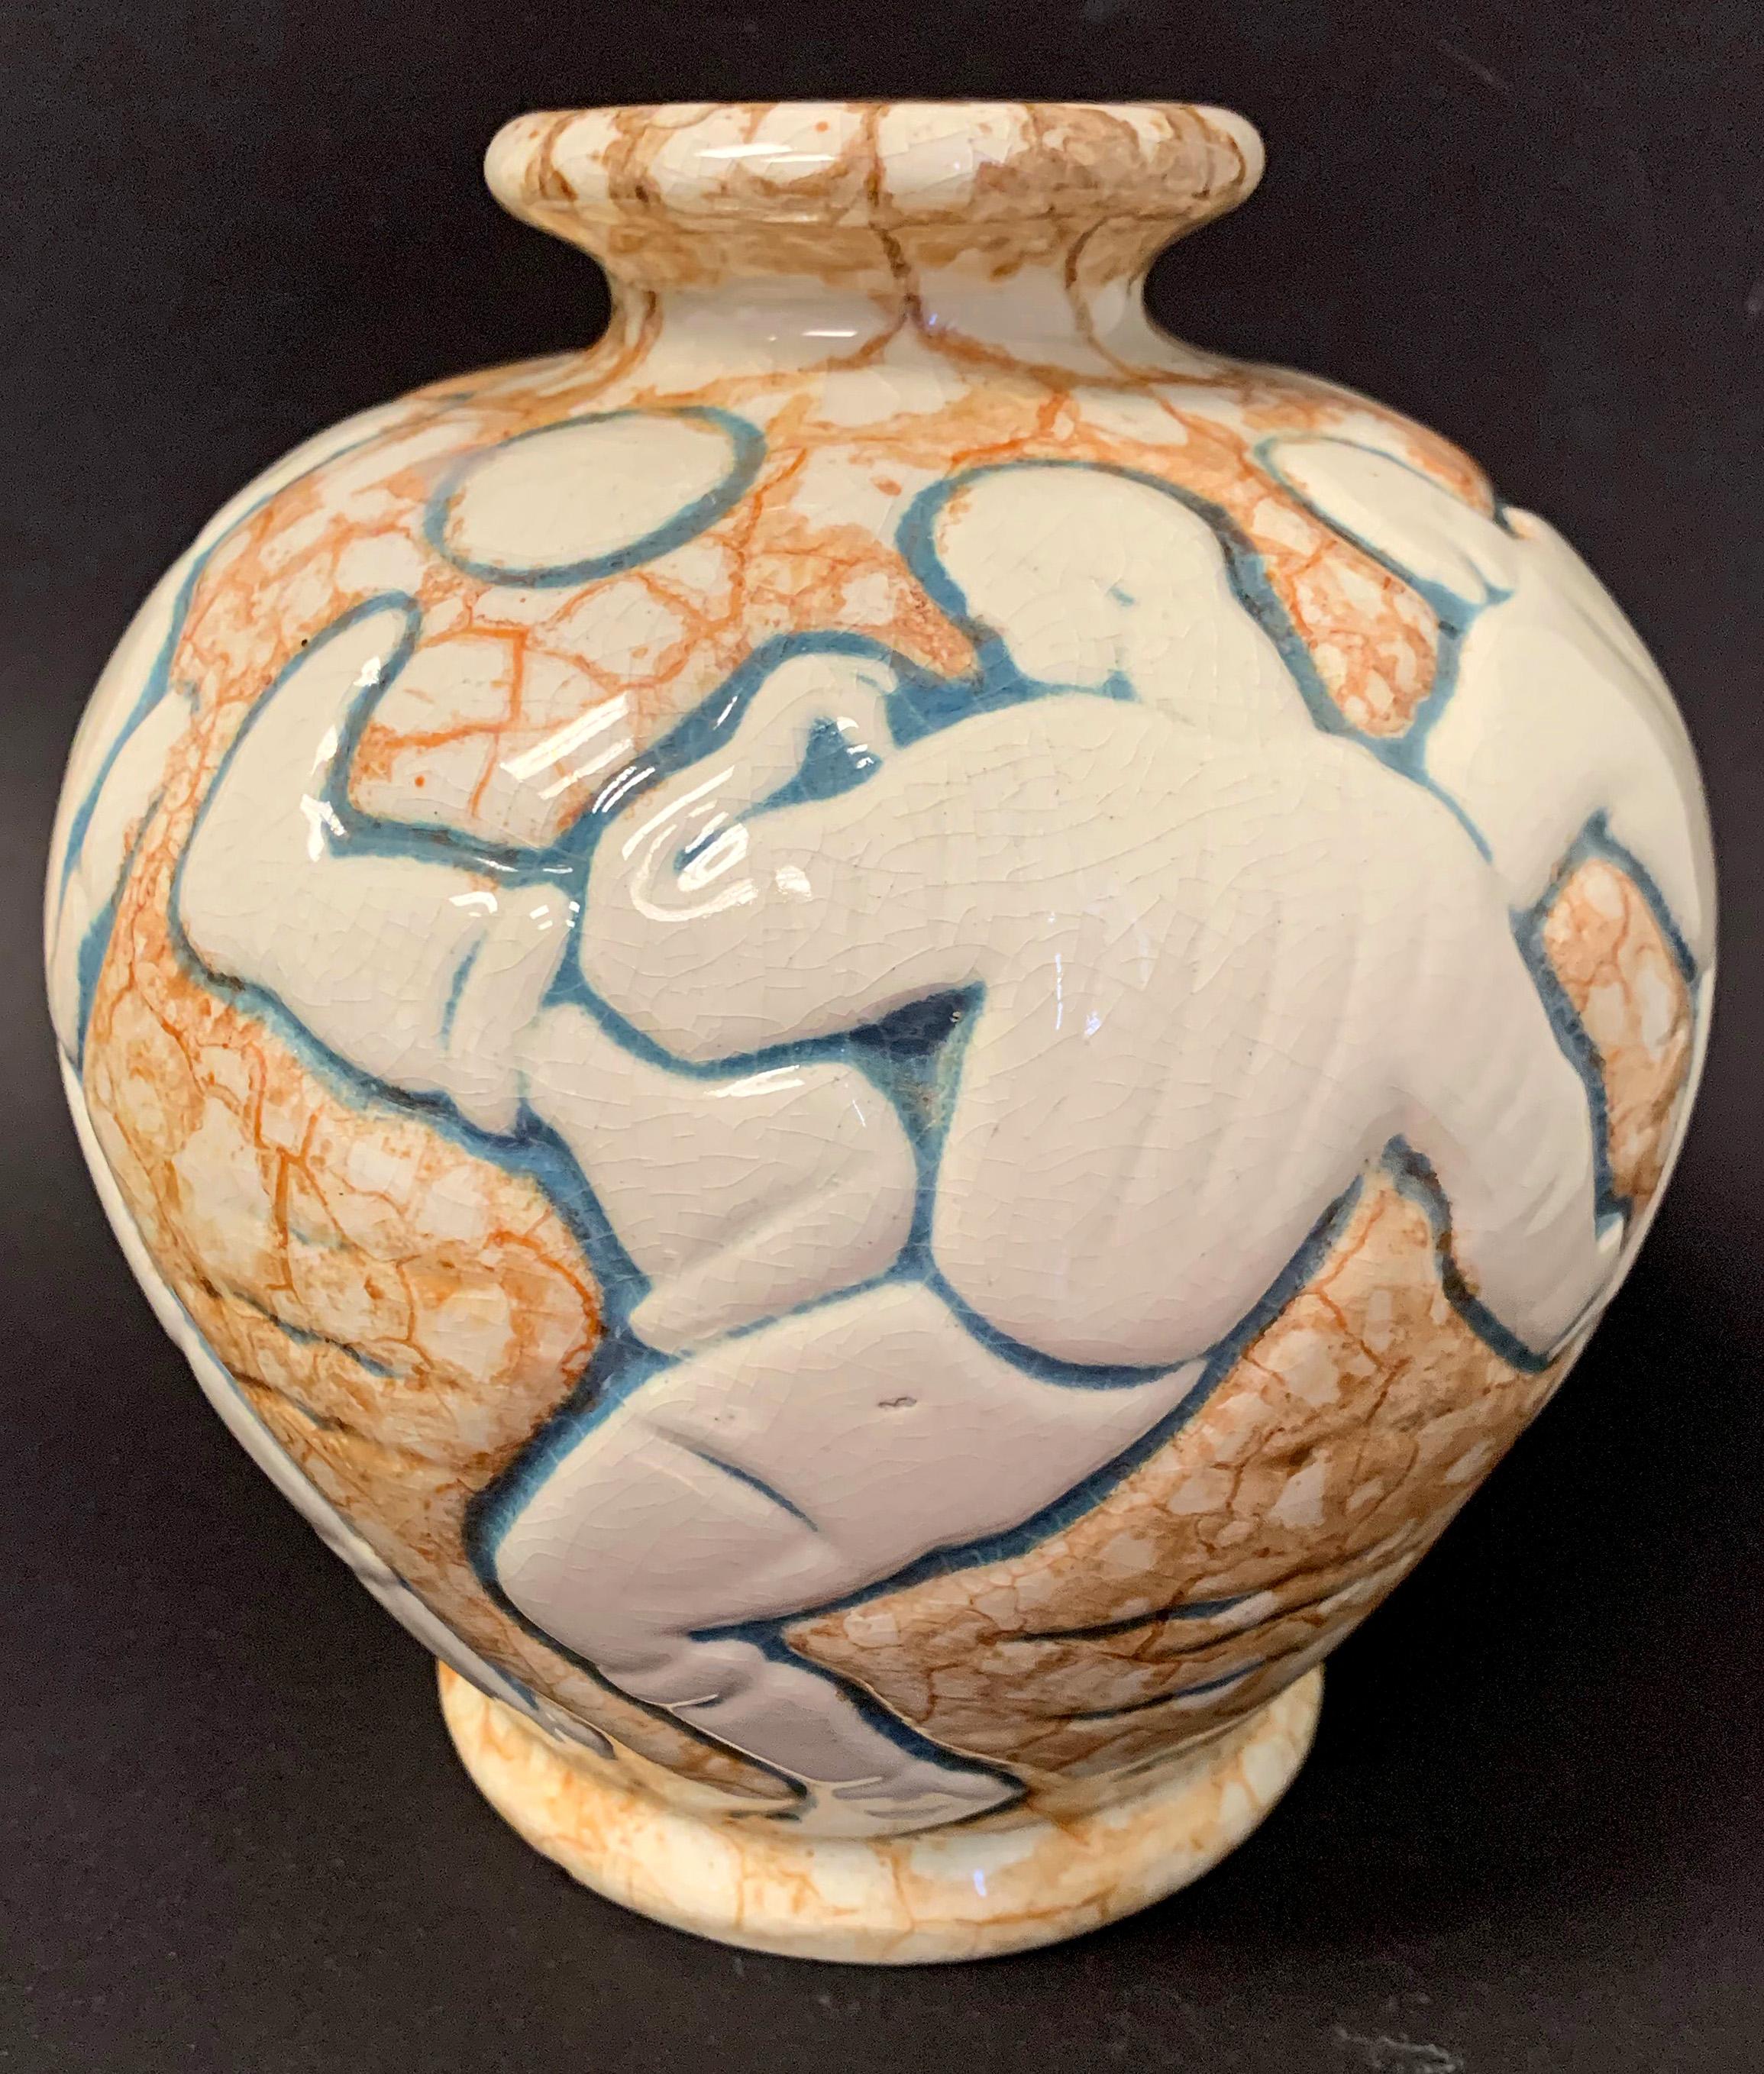 Very rare and full of energy, this Art Deco vase depicts a frieze of six football or soccer players in the midst of the game, the ball in the air and very much in play. This piece was designed by André Legrand for Mougin Frères Nancy, a renowned